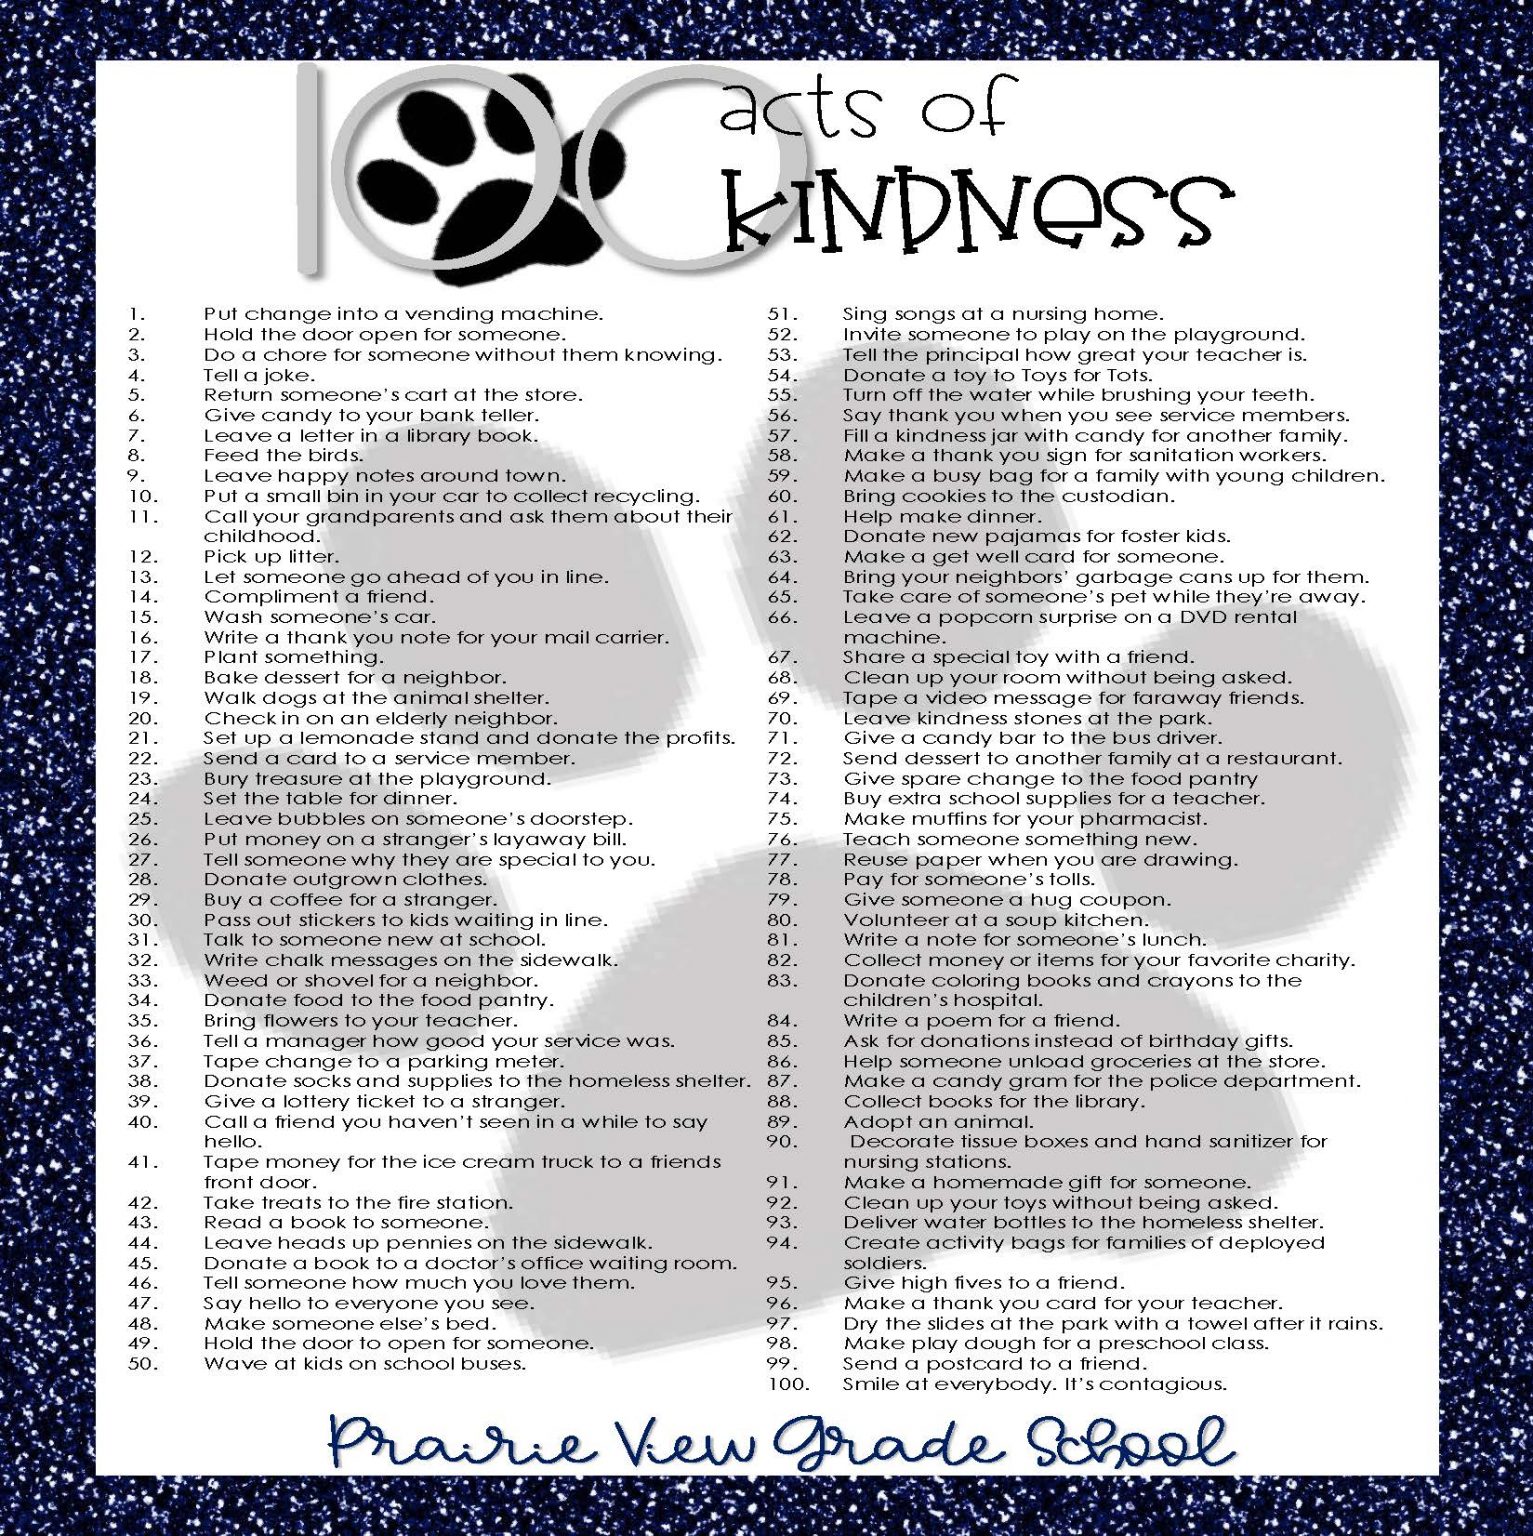 100 Acts of Kindness - Prairie View Grade School